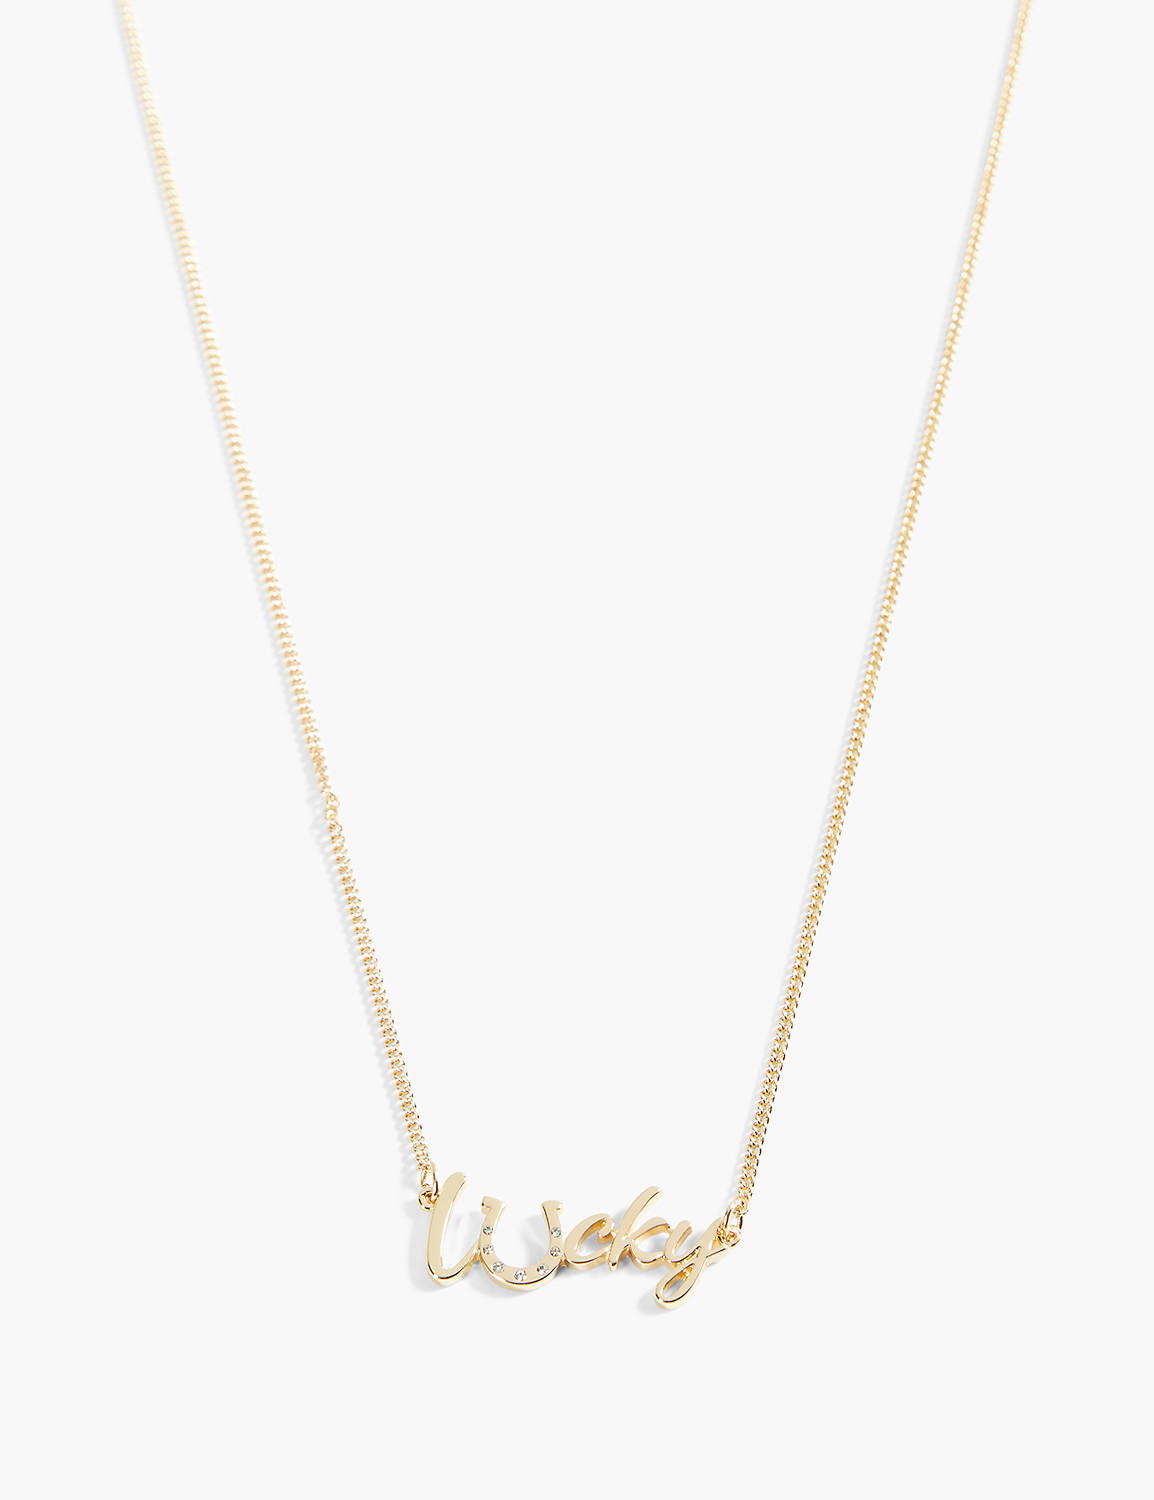 Lucky Necklace Product Image 1